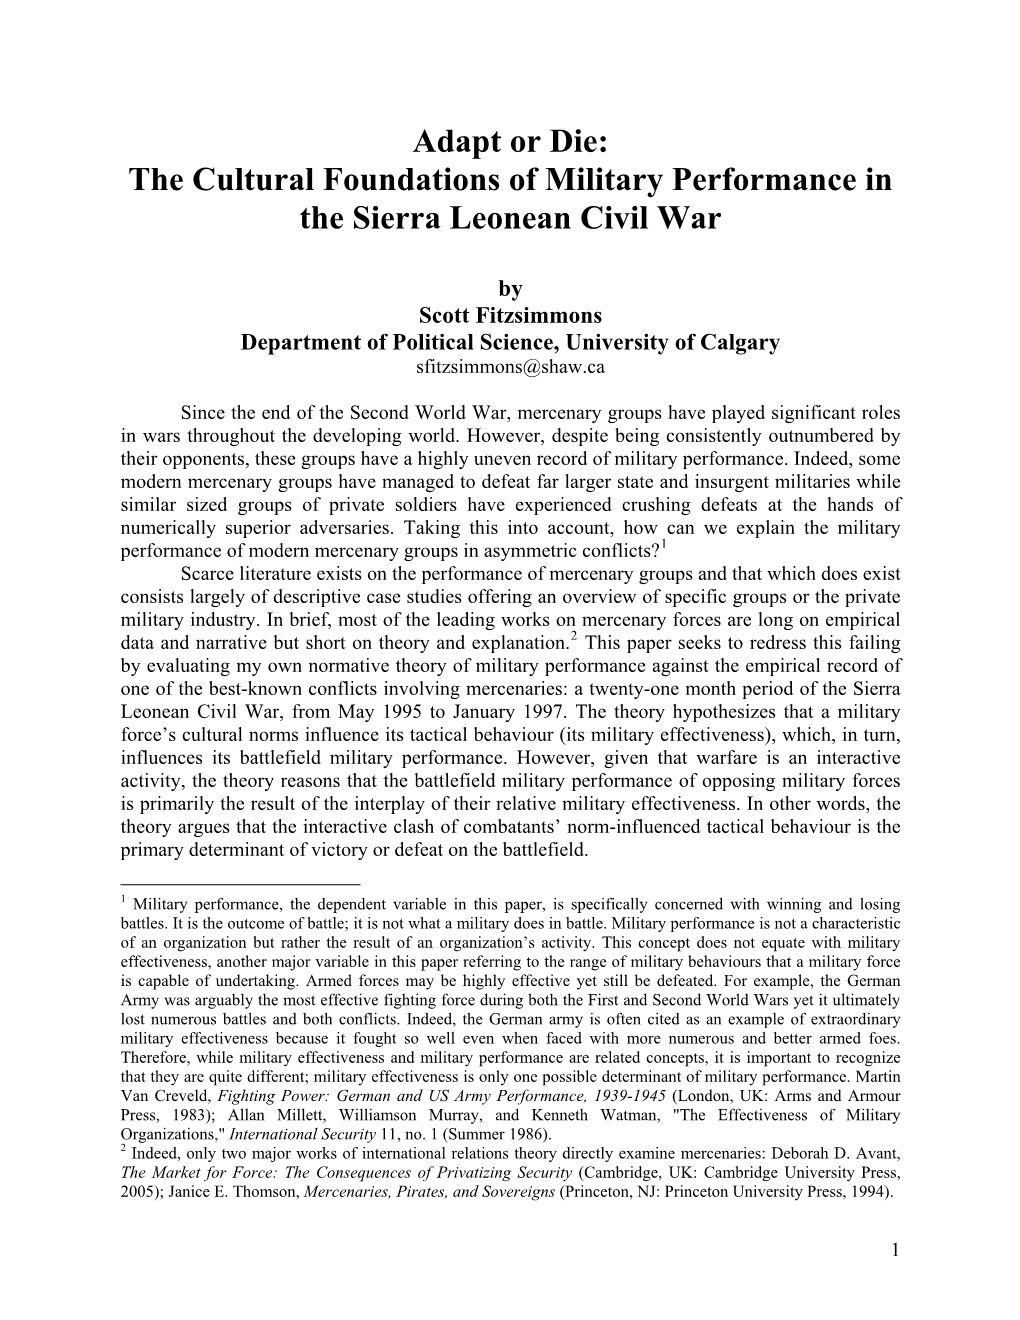 Adapt Or Die: the Cultural Foundations of Military Performance in the Sierra Leonean Civil War